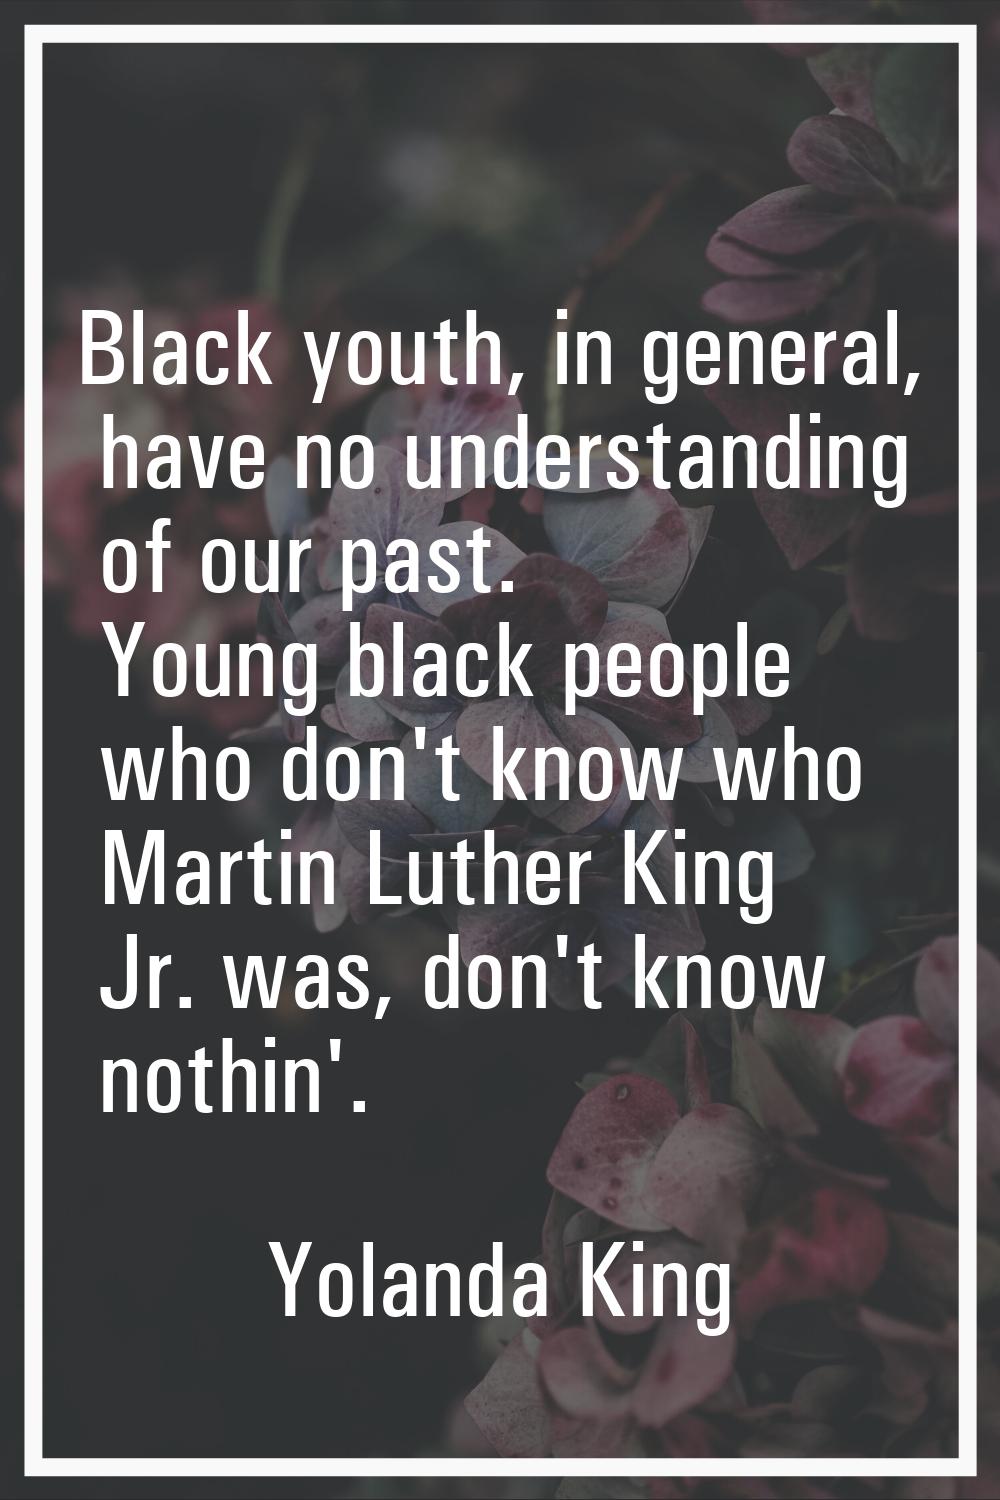 Black youth, in general, have no understanding of our past. Young black people who don't know who M